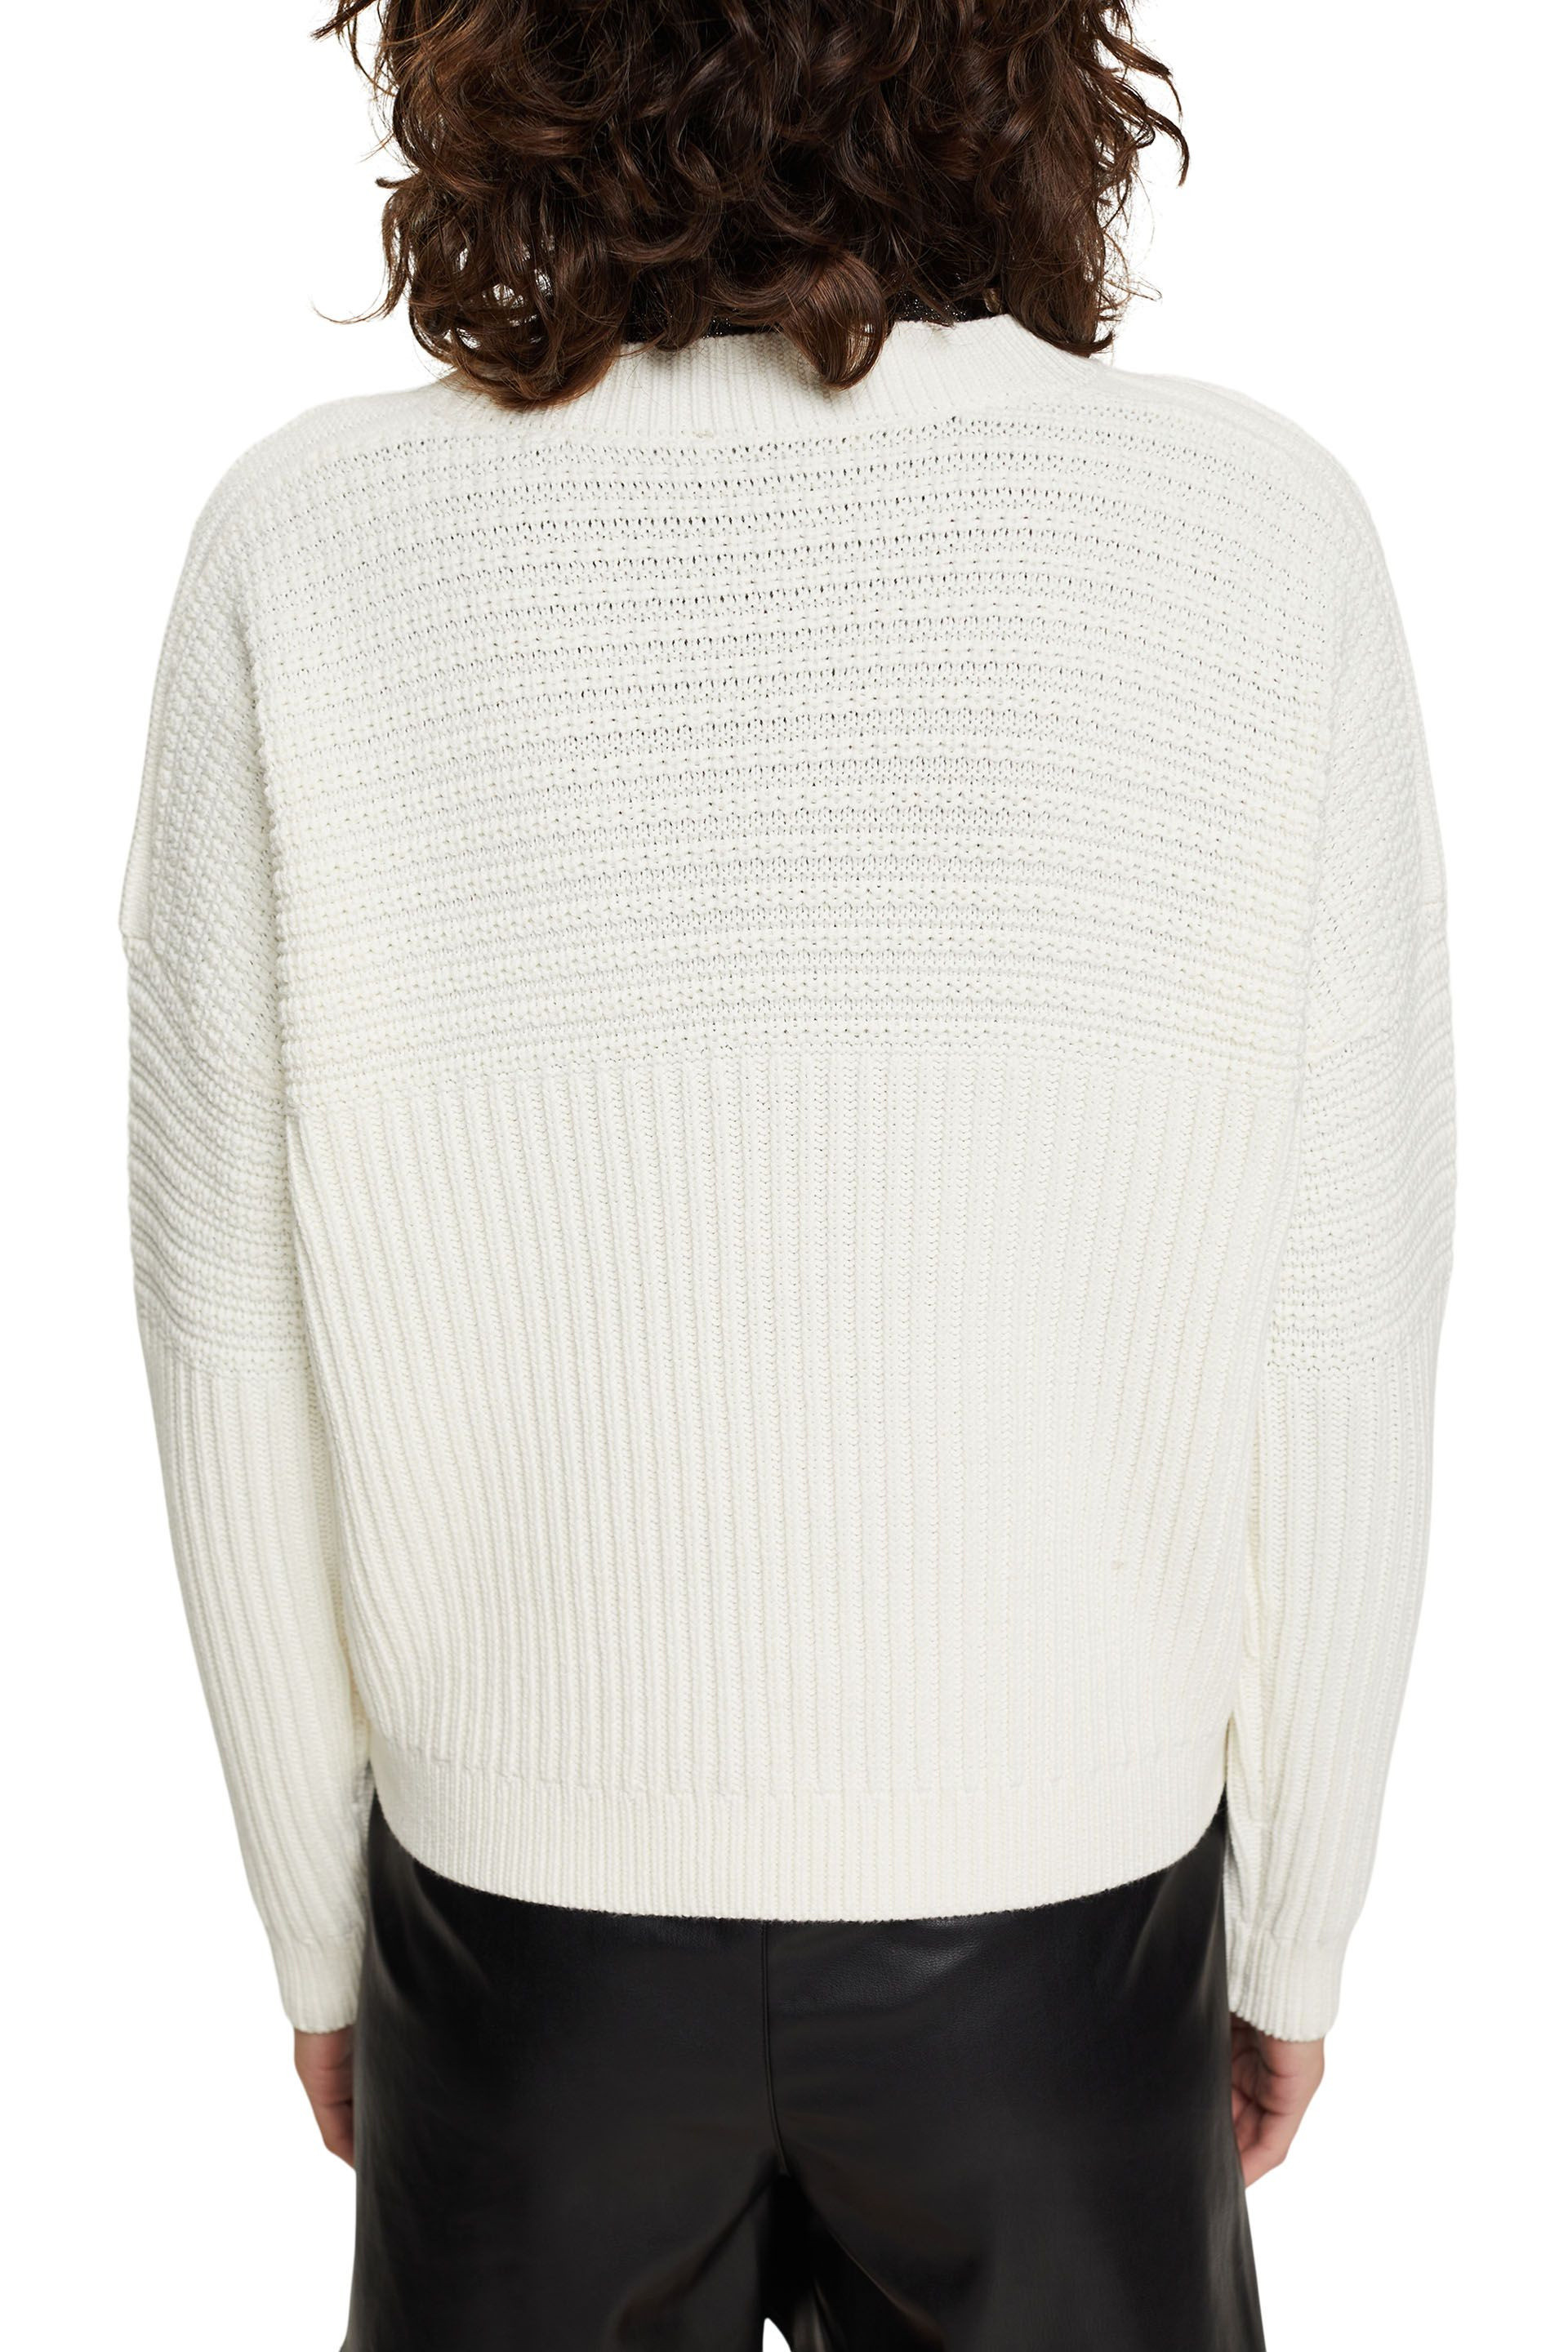 Esprit - Chunky knit pullover in cotton blend, White, large image number 2